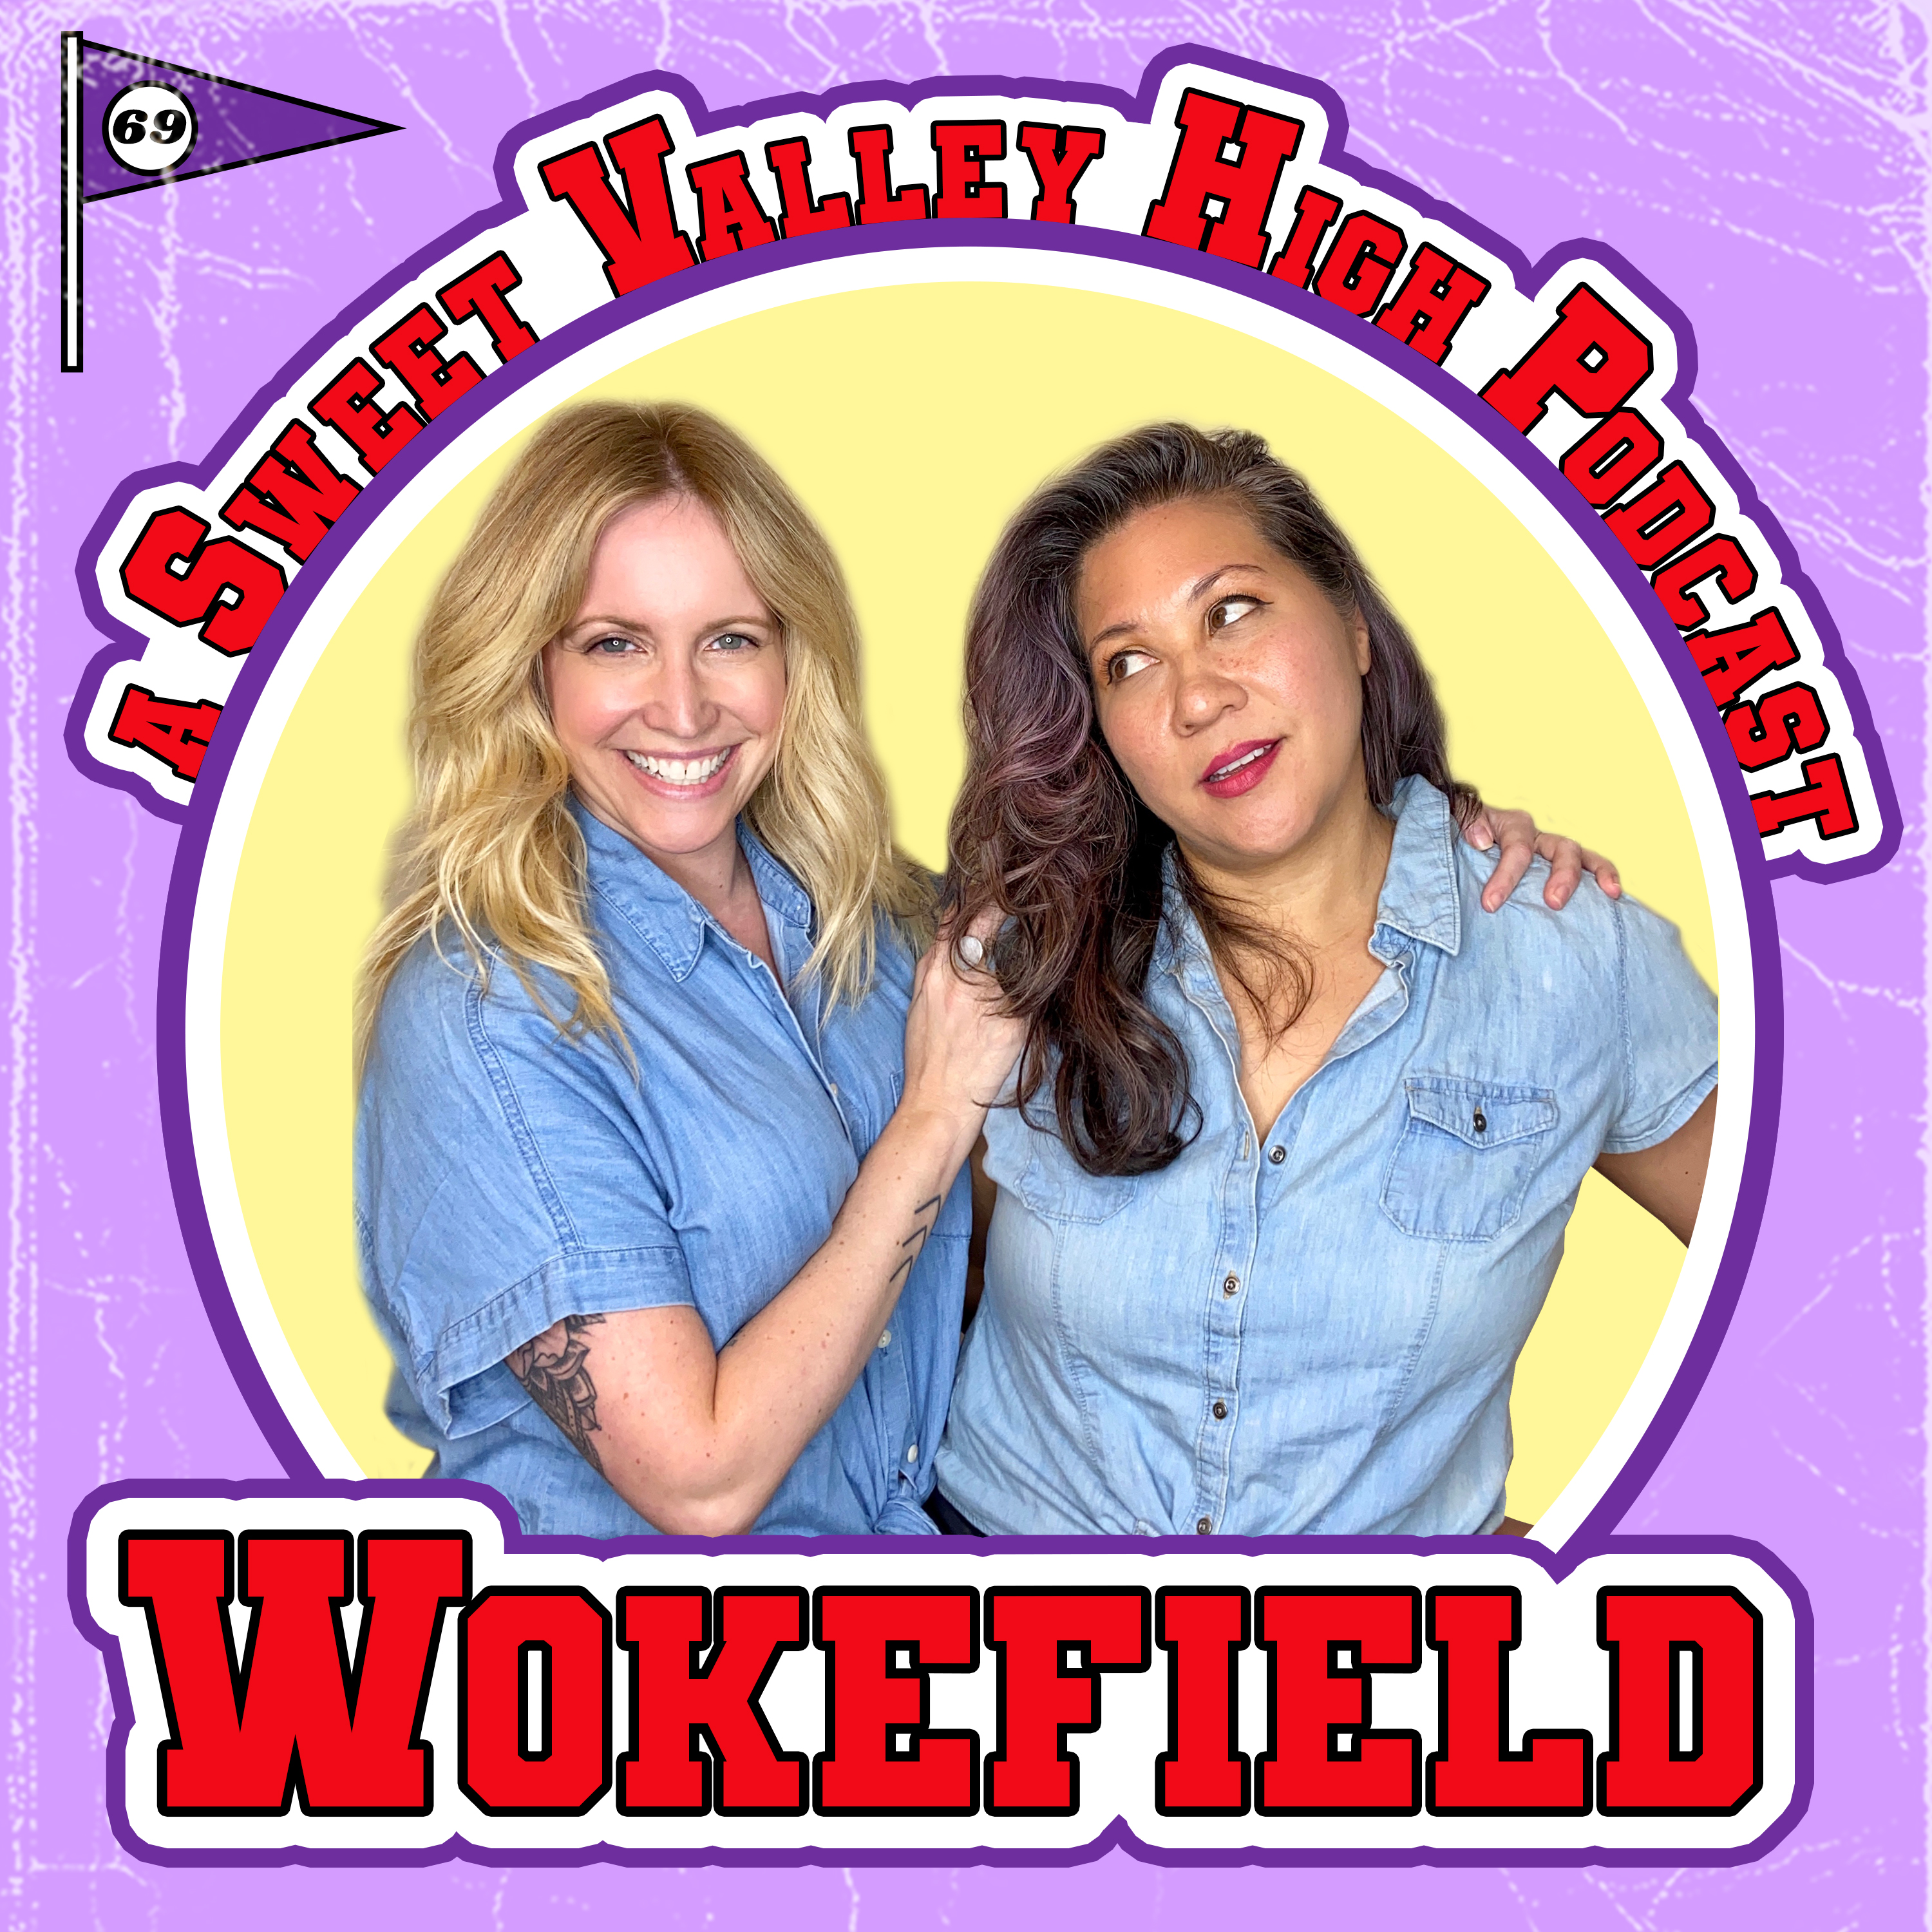 Episode 1 - The All-American Girl  - Sweet Valley High